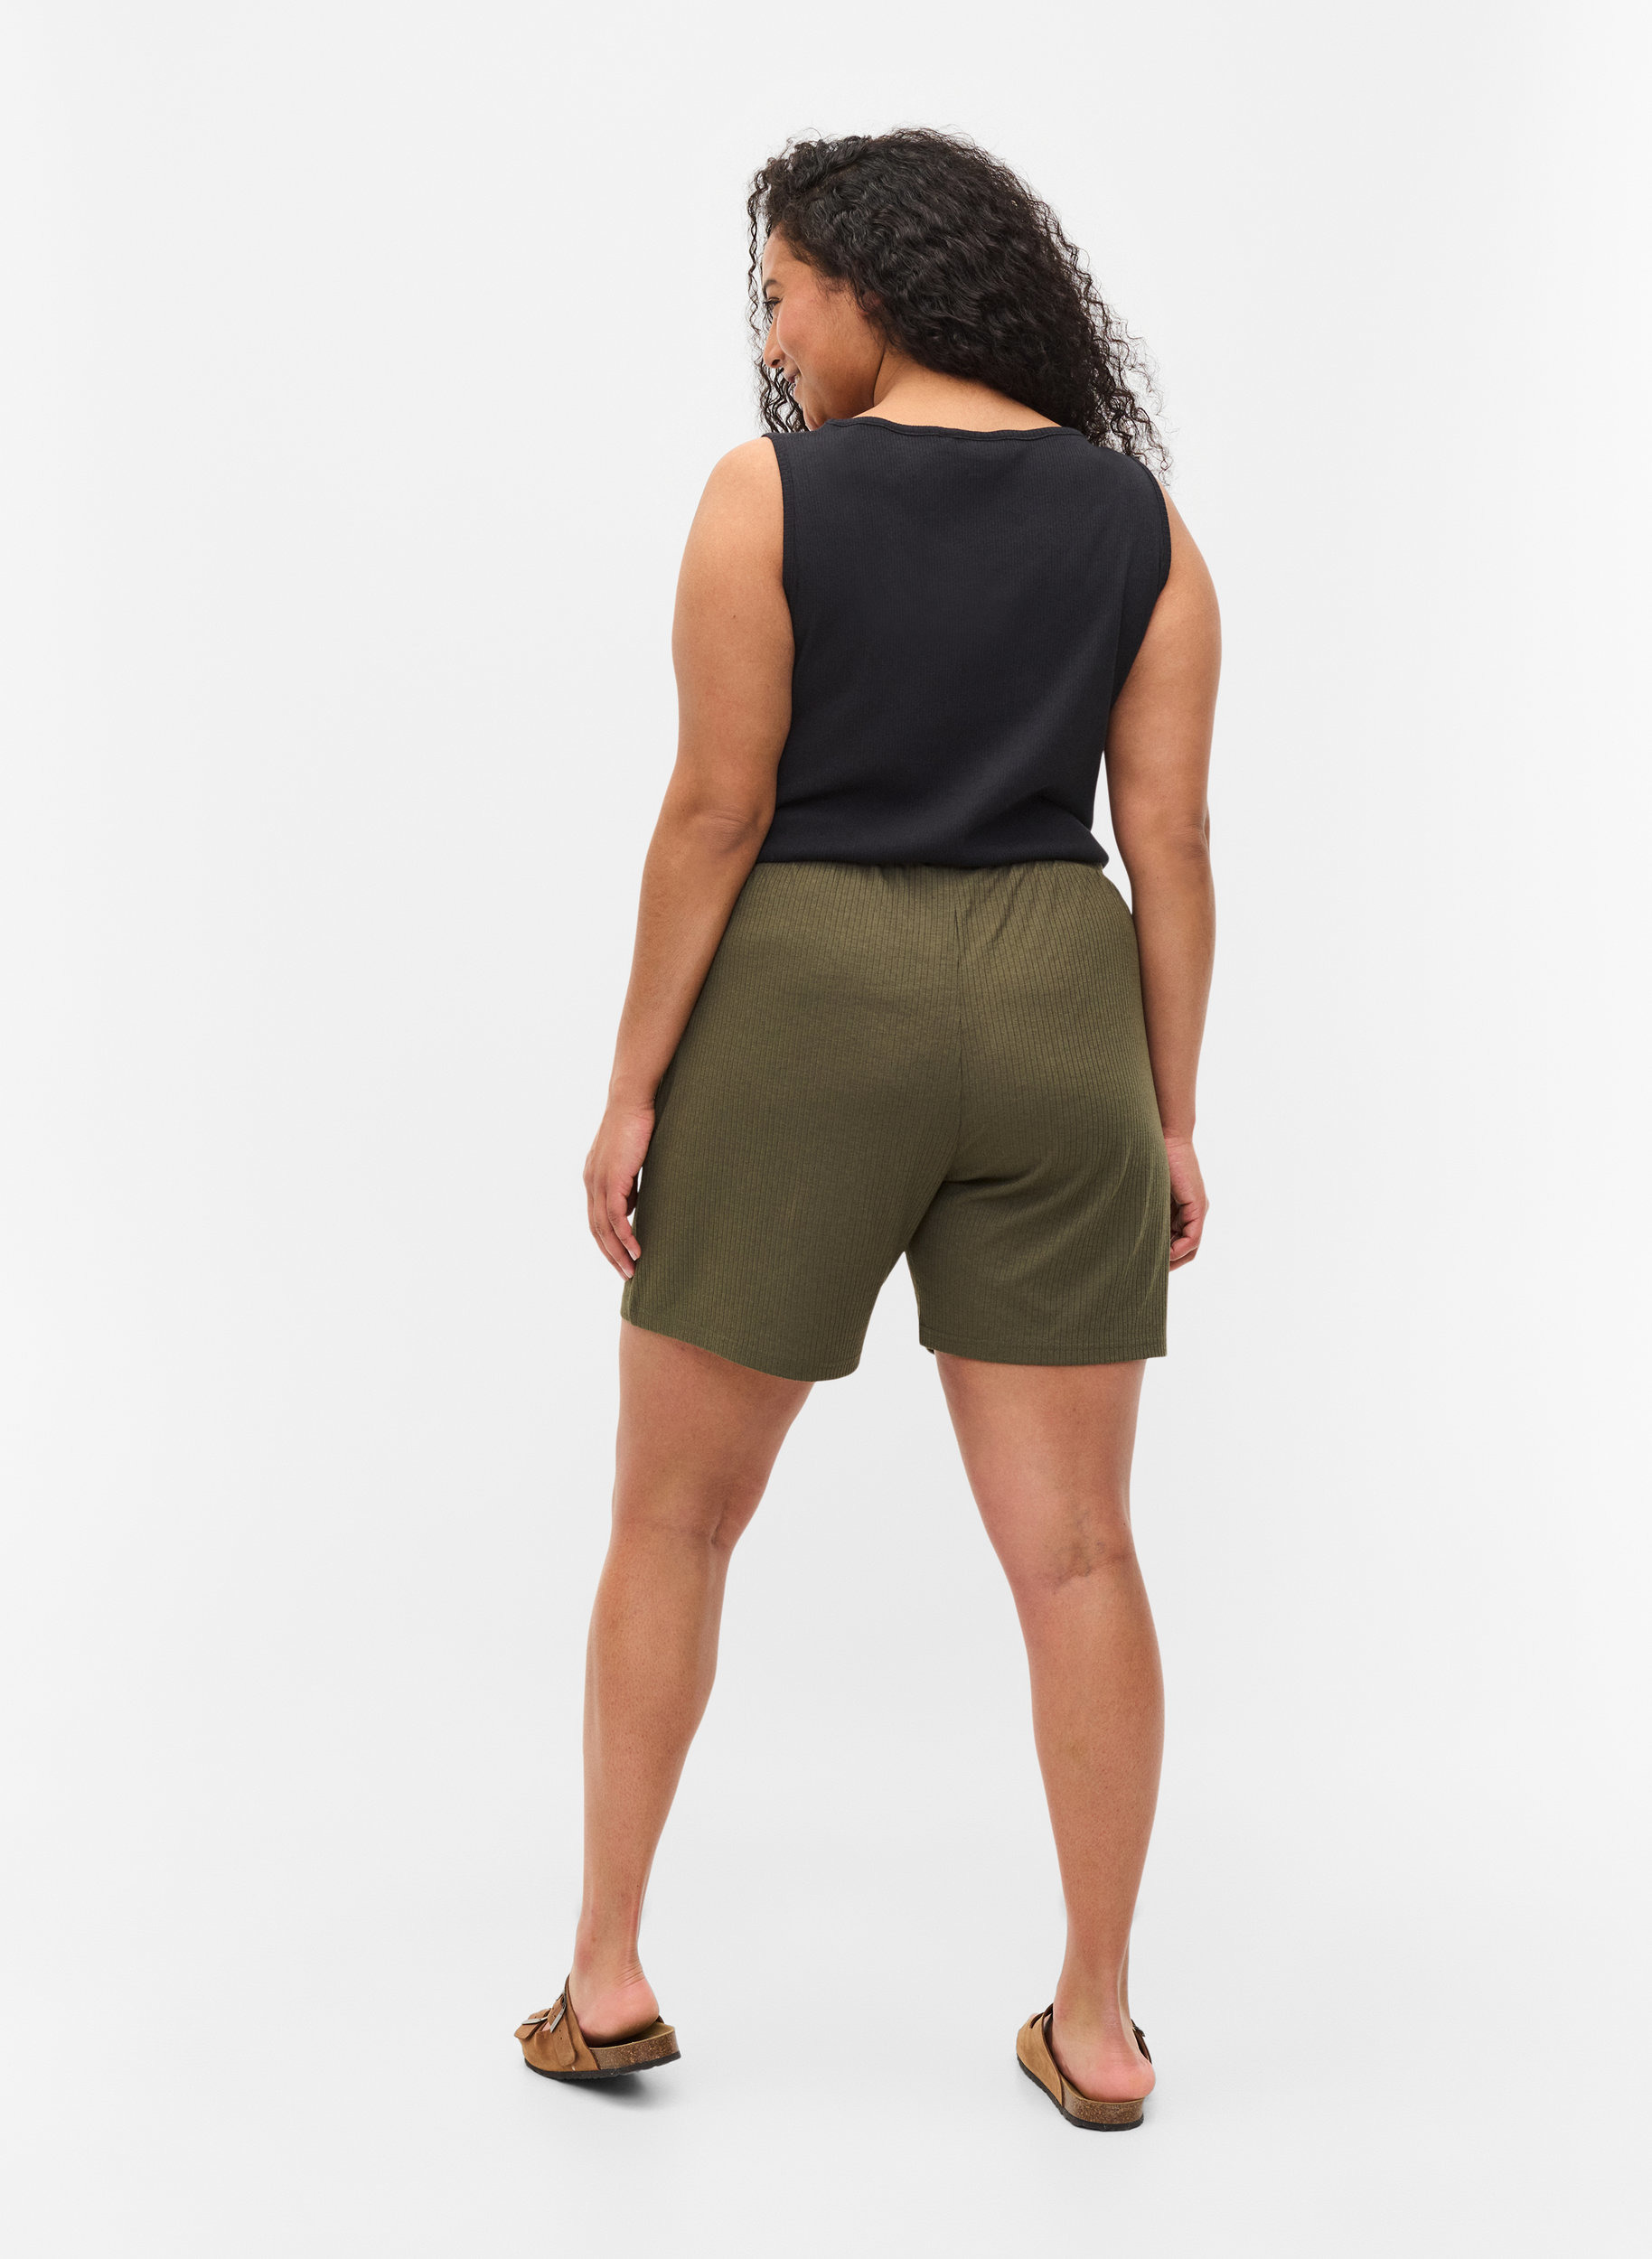 Shorts in ribbed fabric with pockets, Dusty Olive, Model